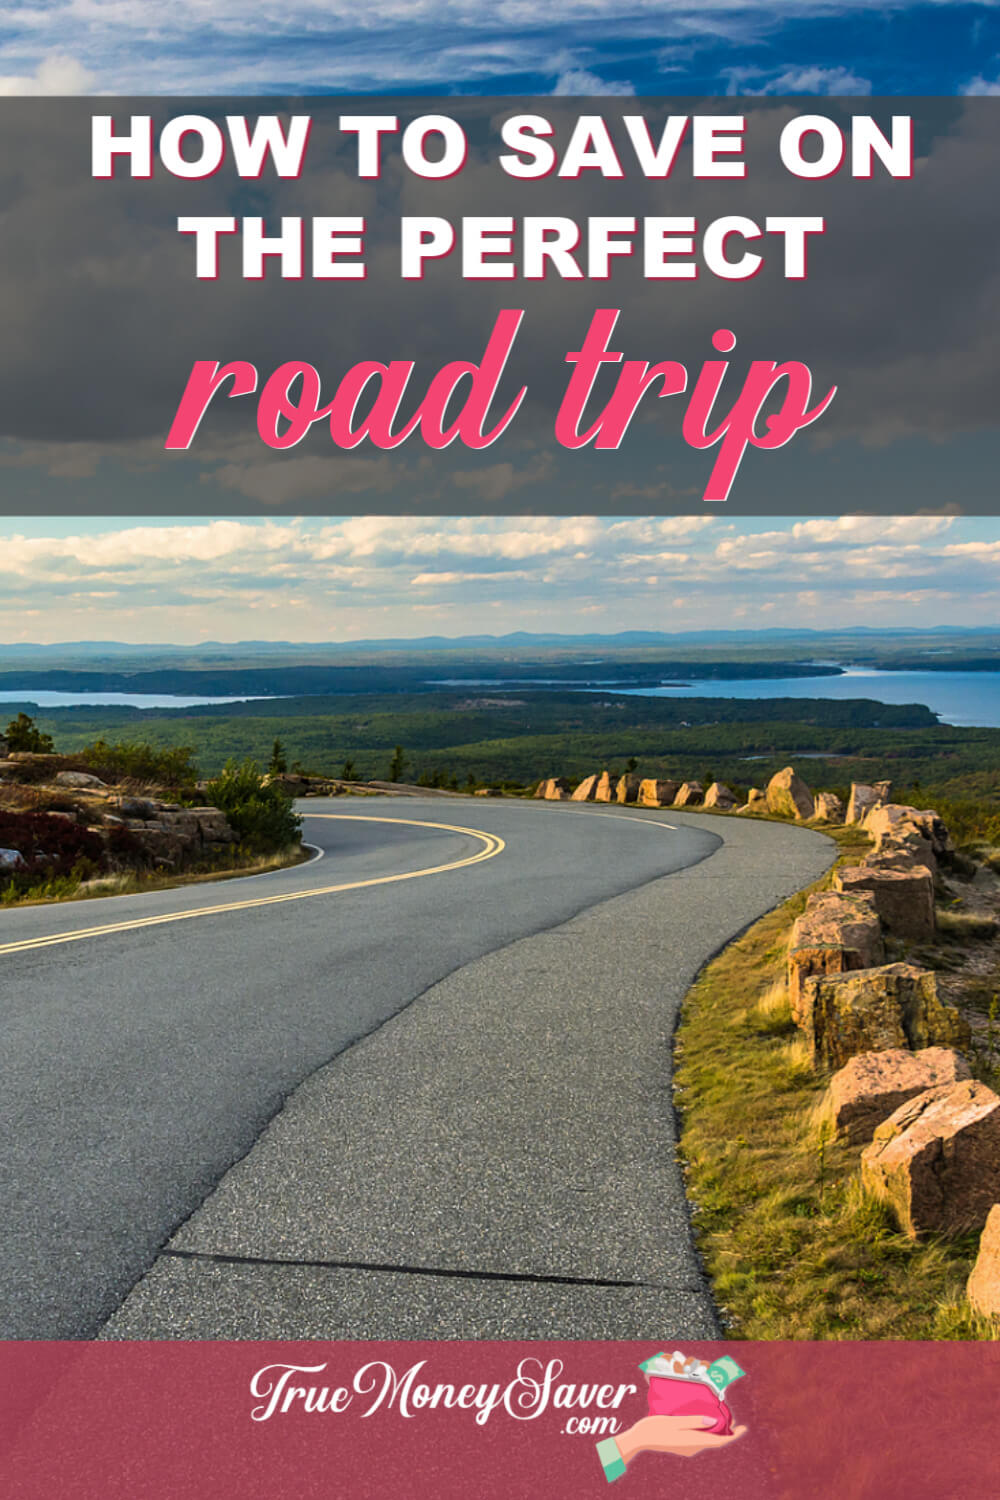 How To Save On The Perfect Road Trip